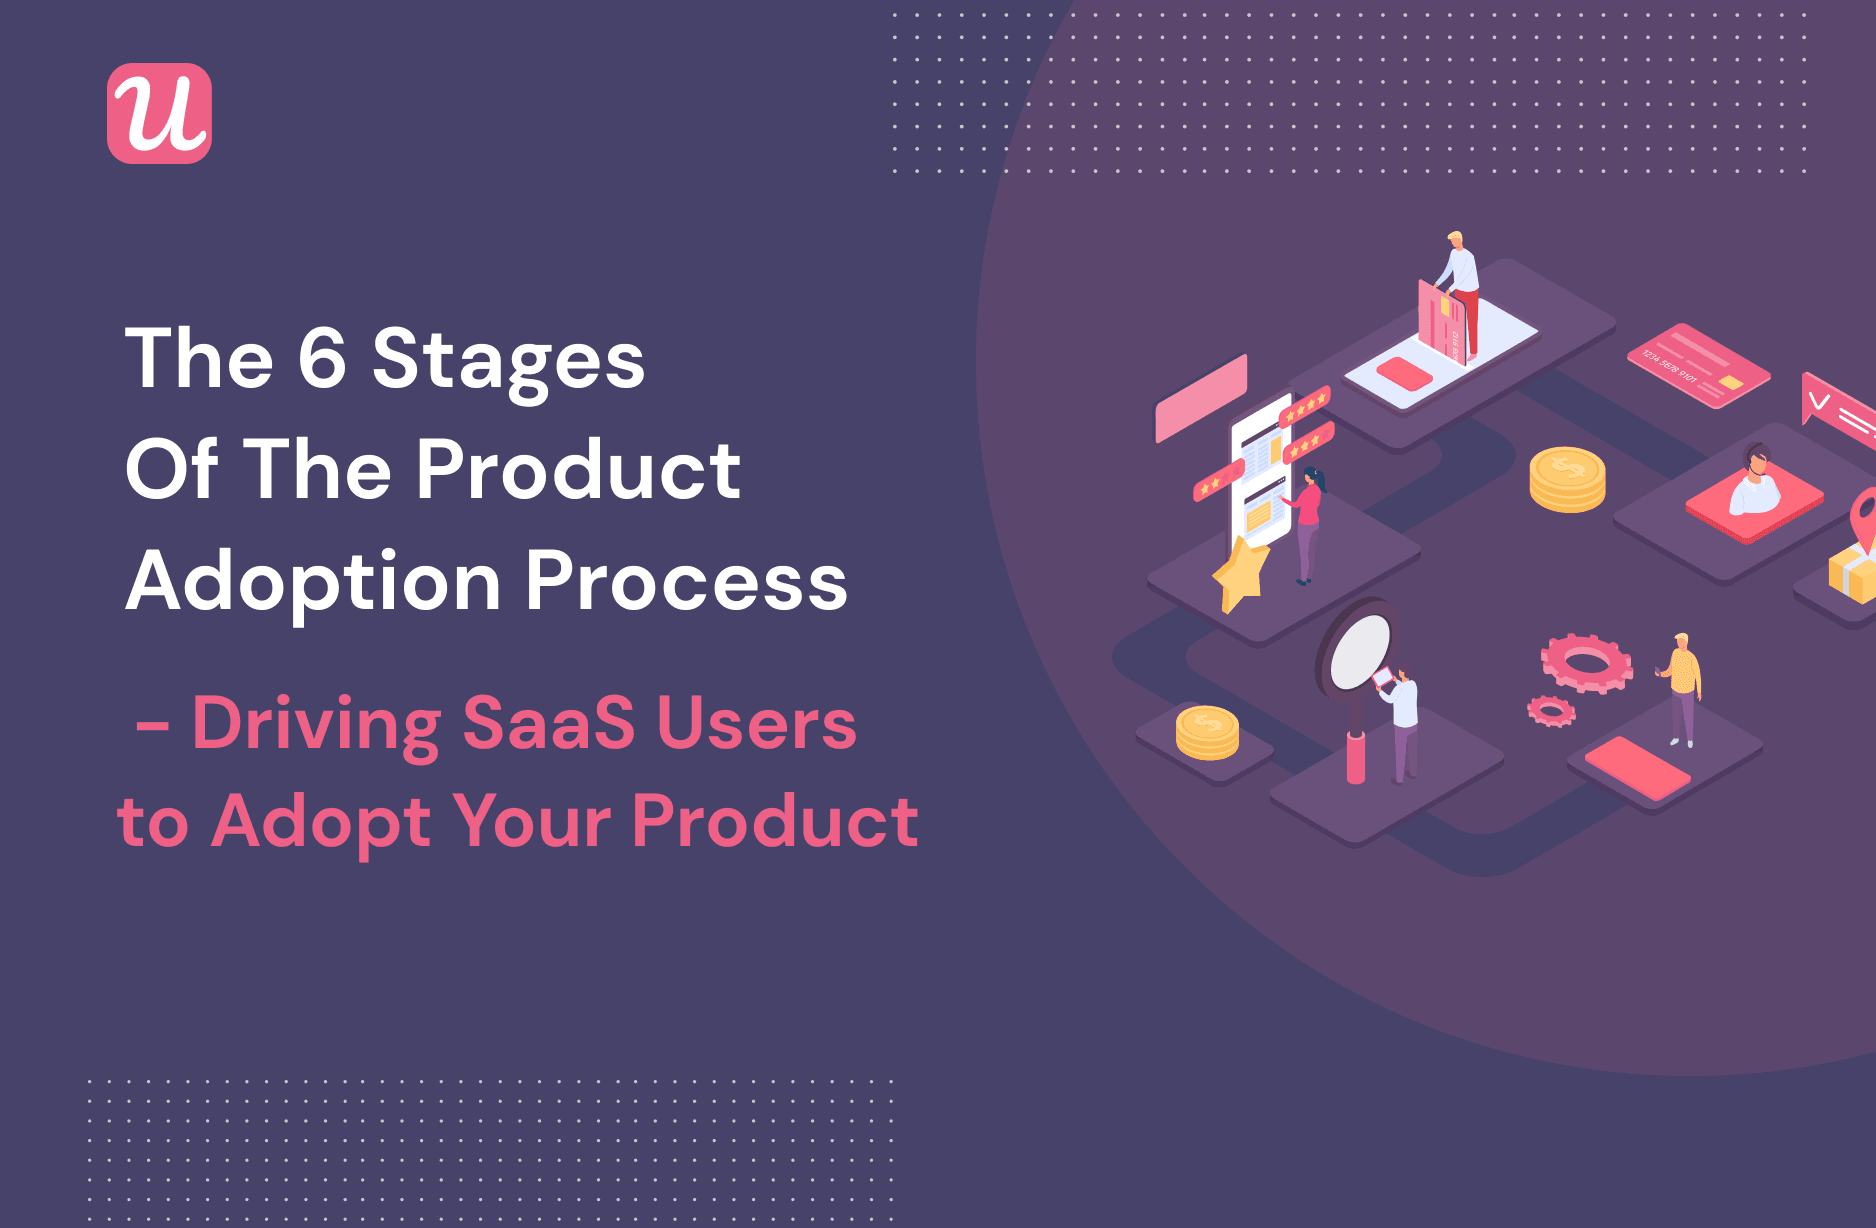 The 6 Stages of The Product Adoption Process - Driving SaaS Users To Adopt Your Product